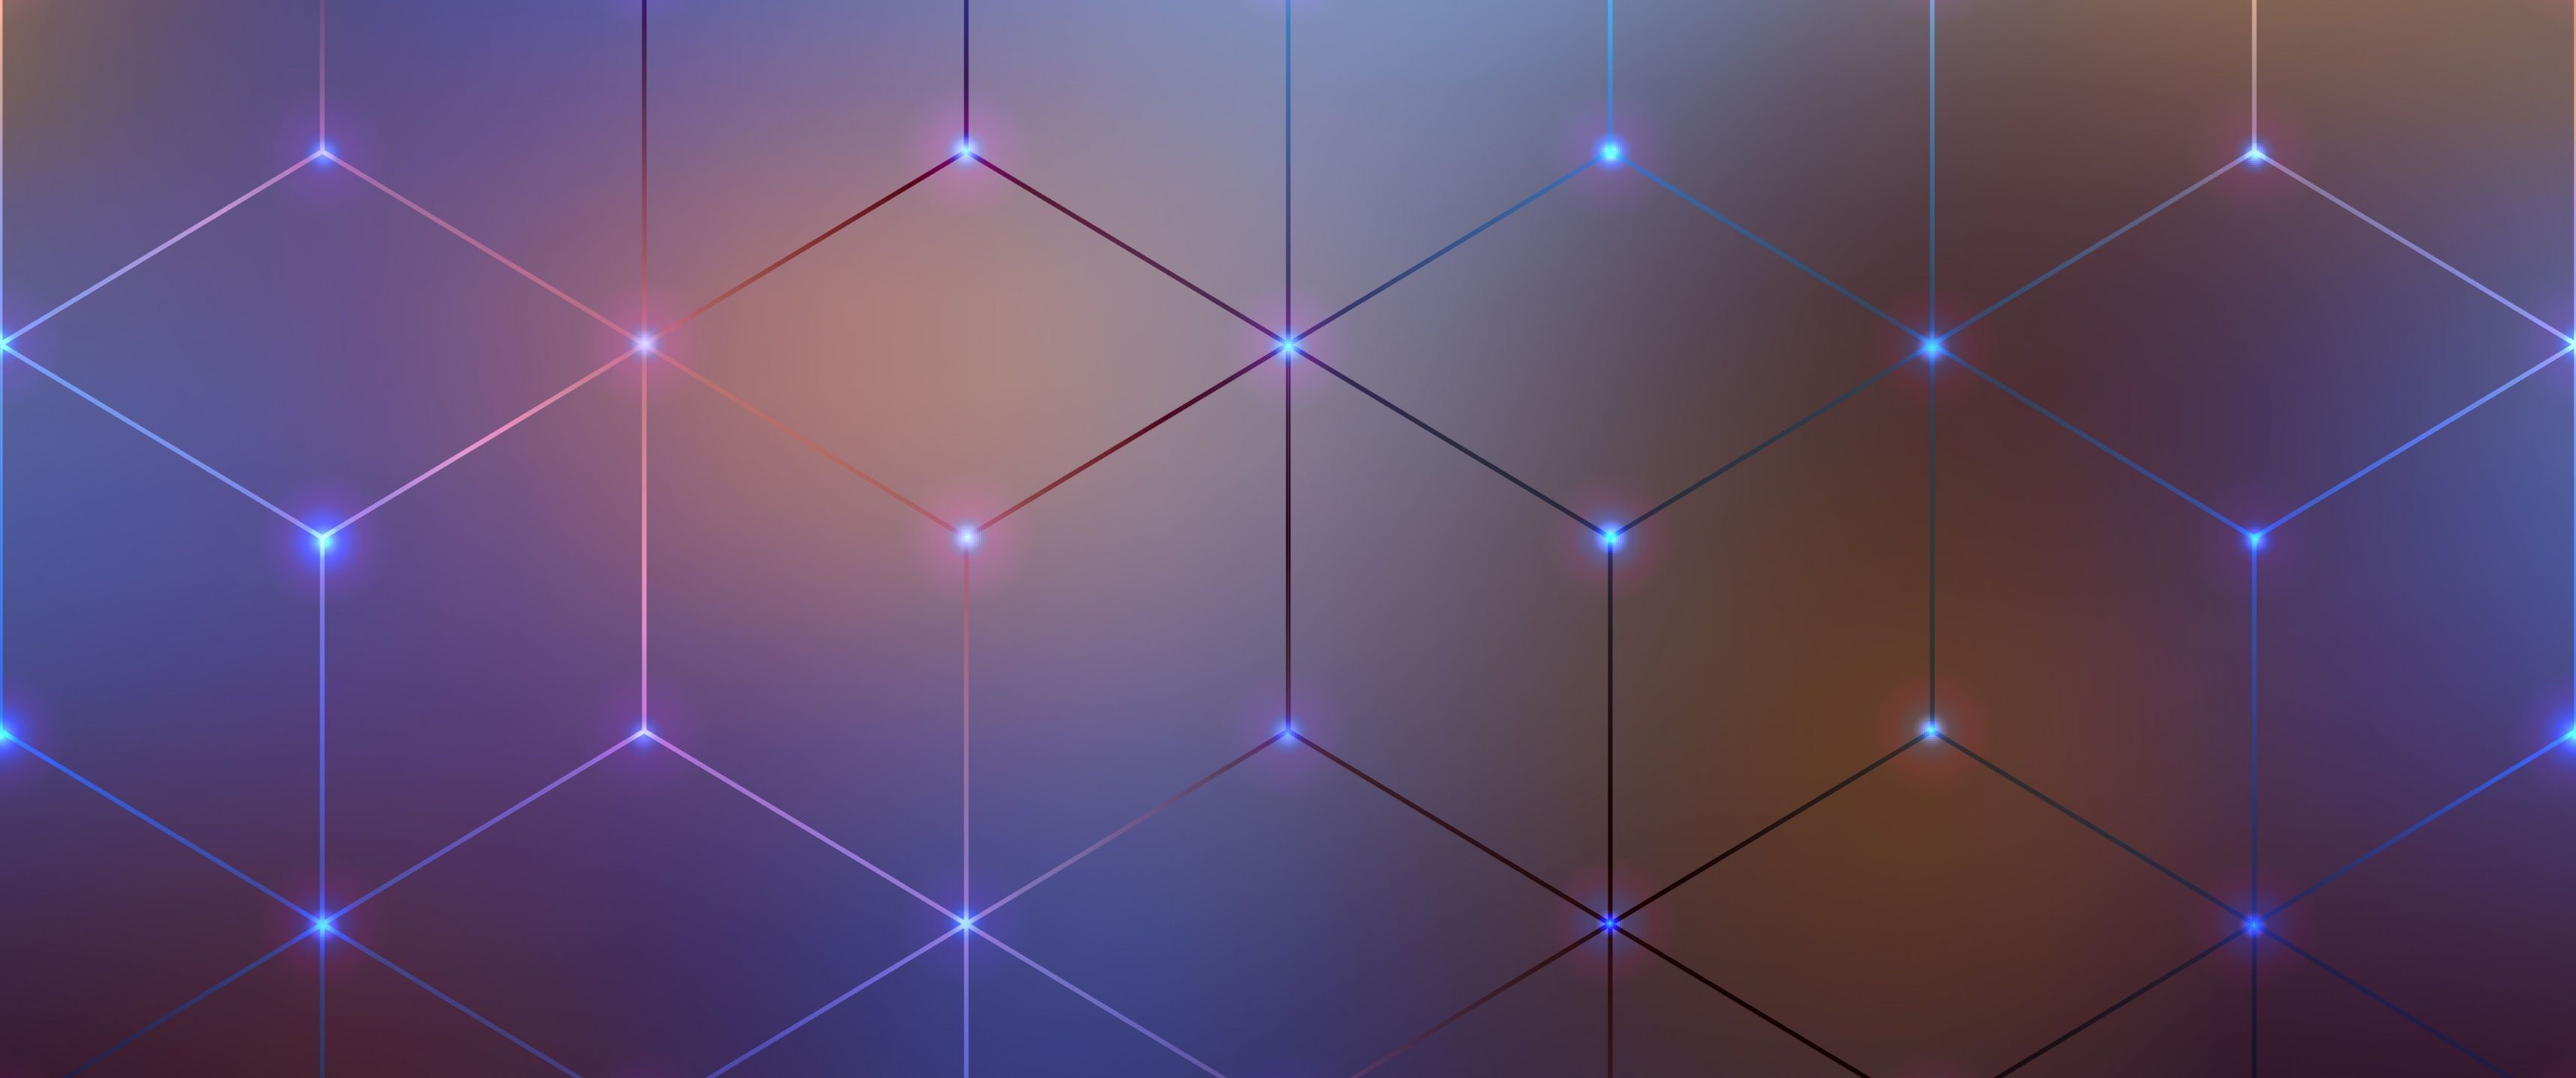 A purple and blue abstract background with glowing lines - Blurry